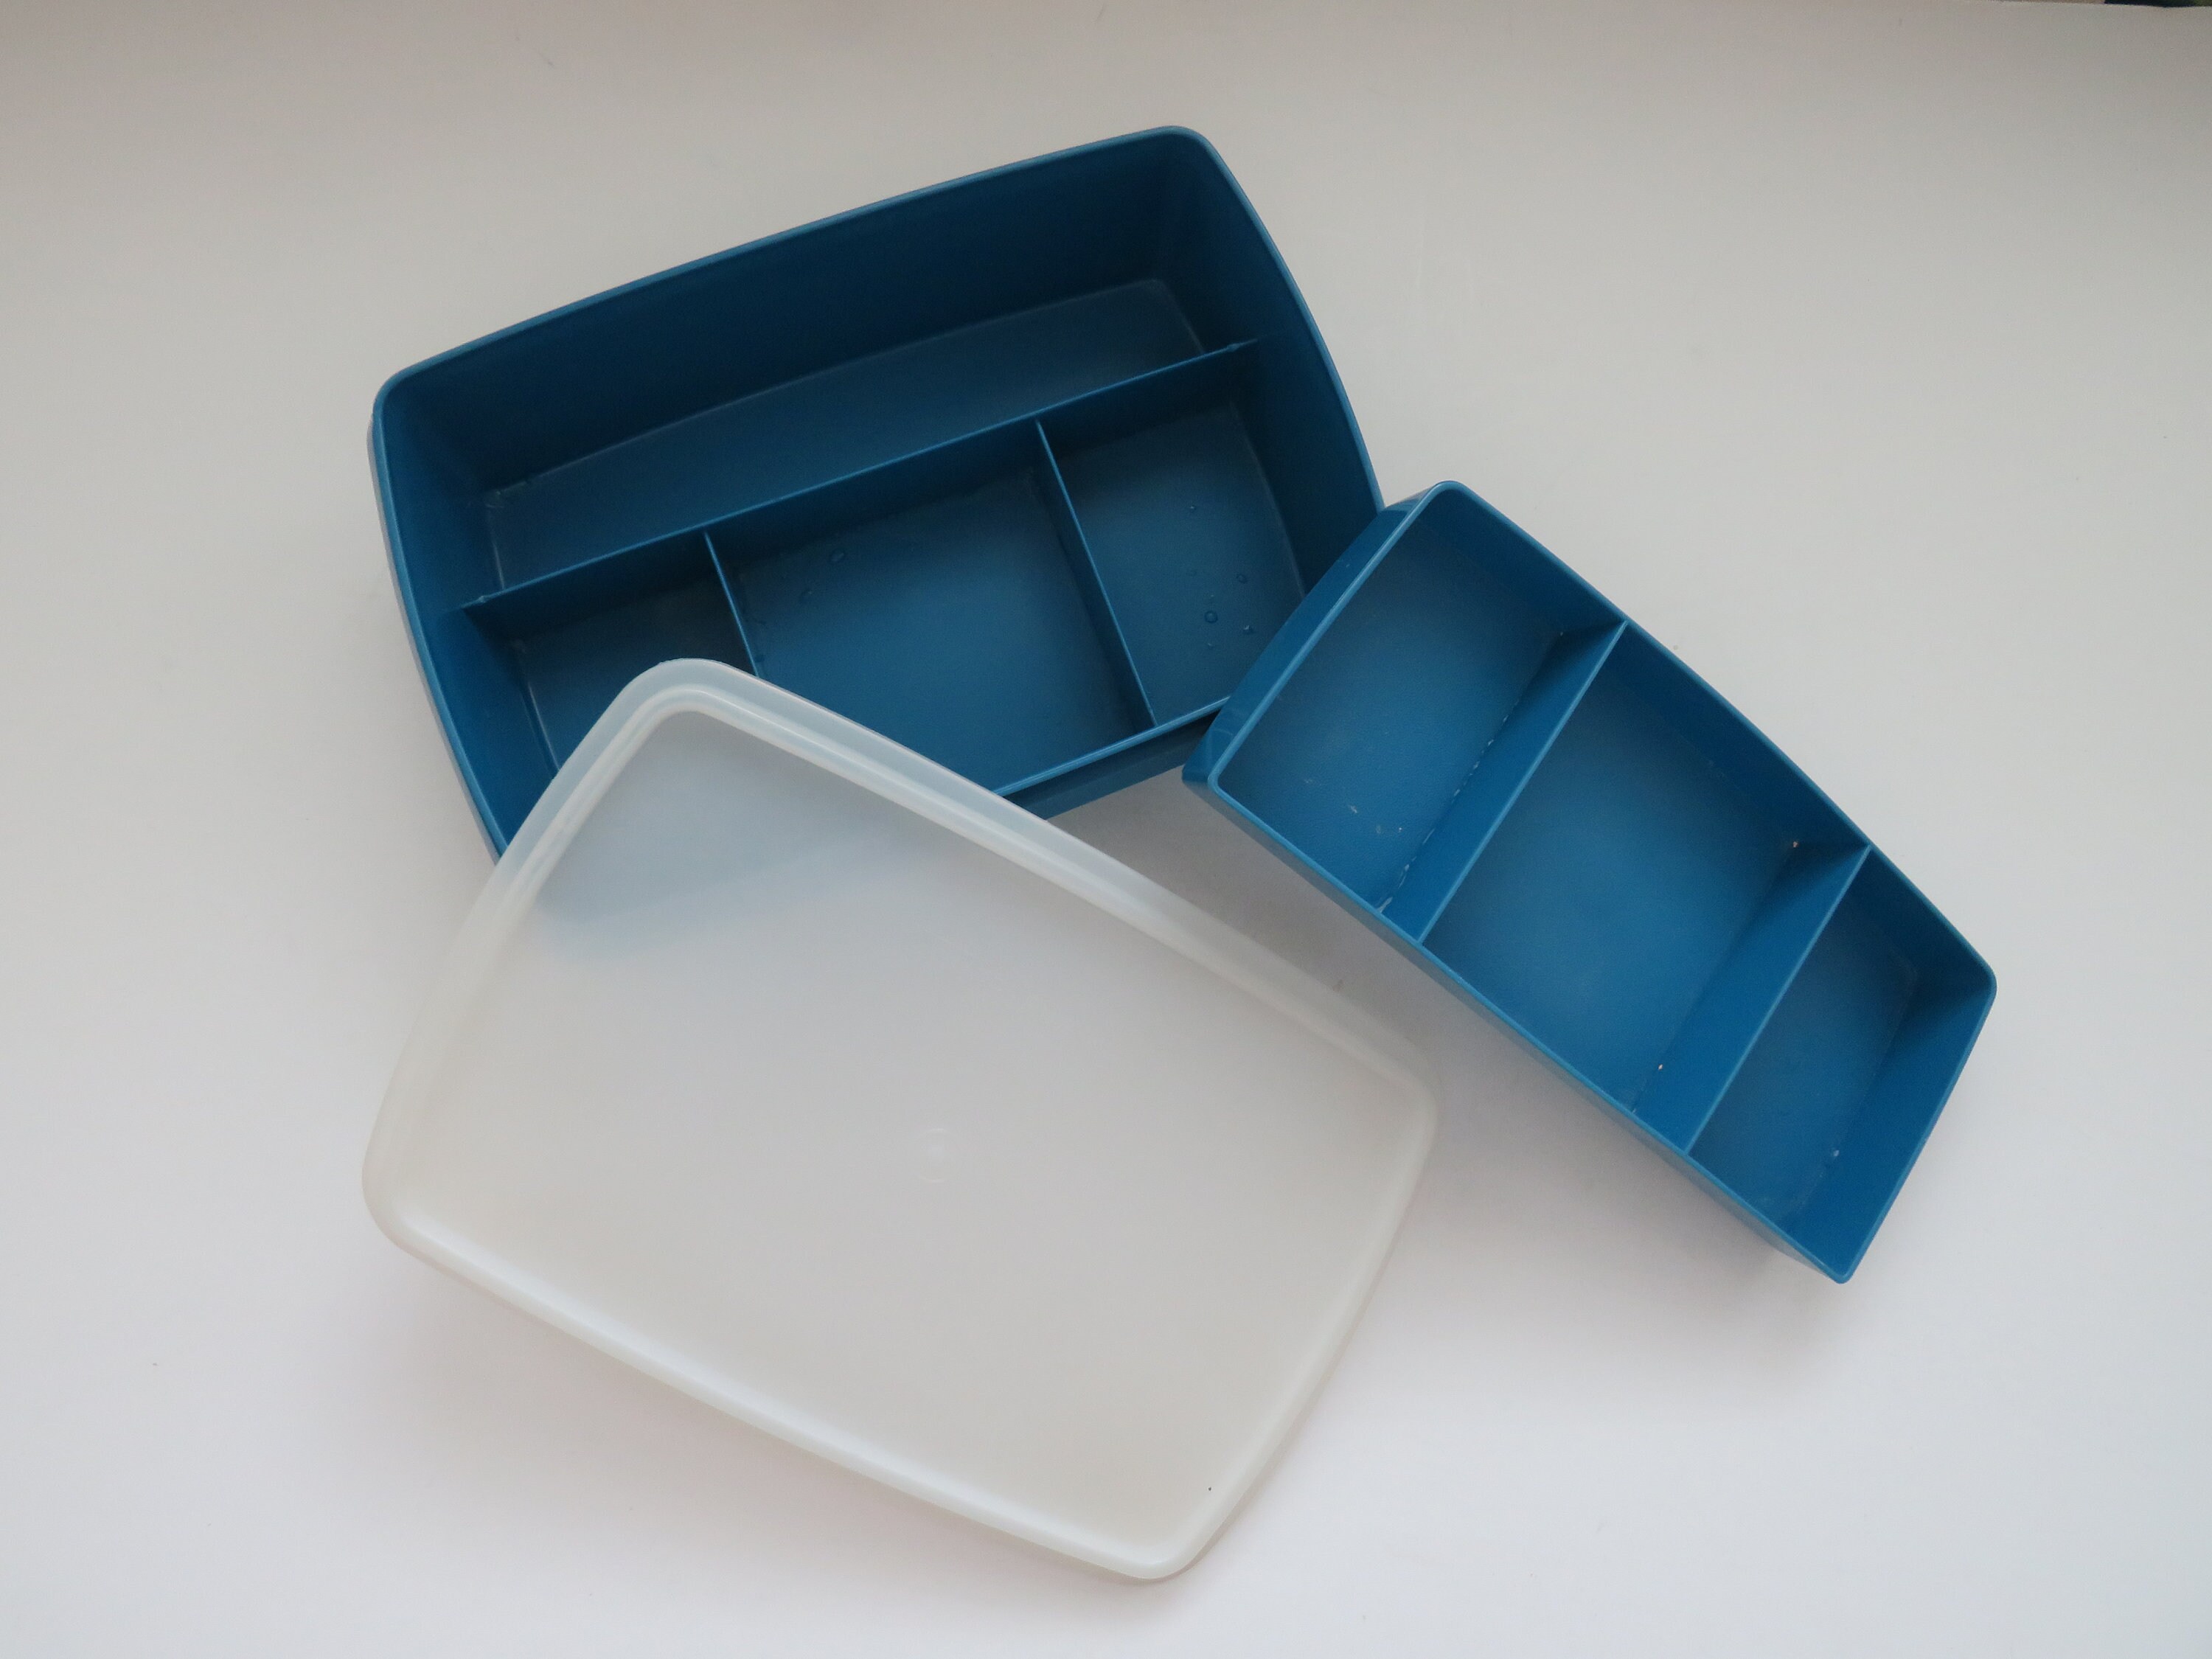 Tupperware Lunch N Things Divided Container Craft Storage Organizer Blue